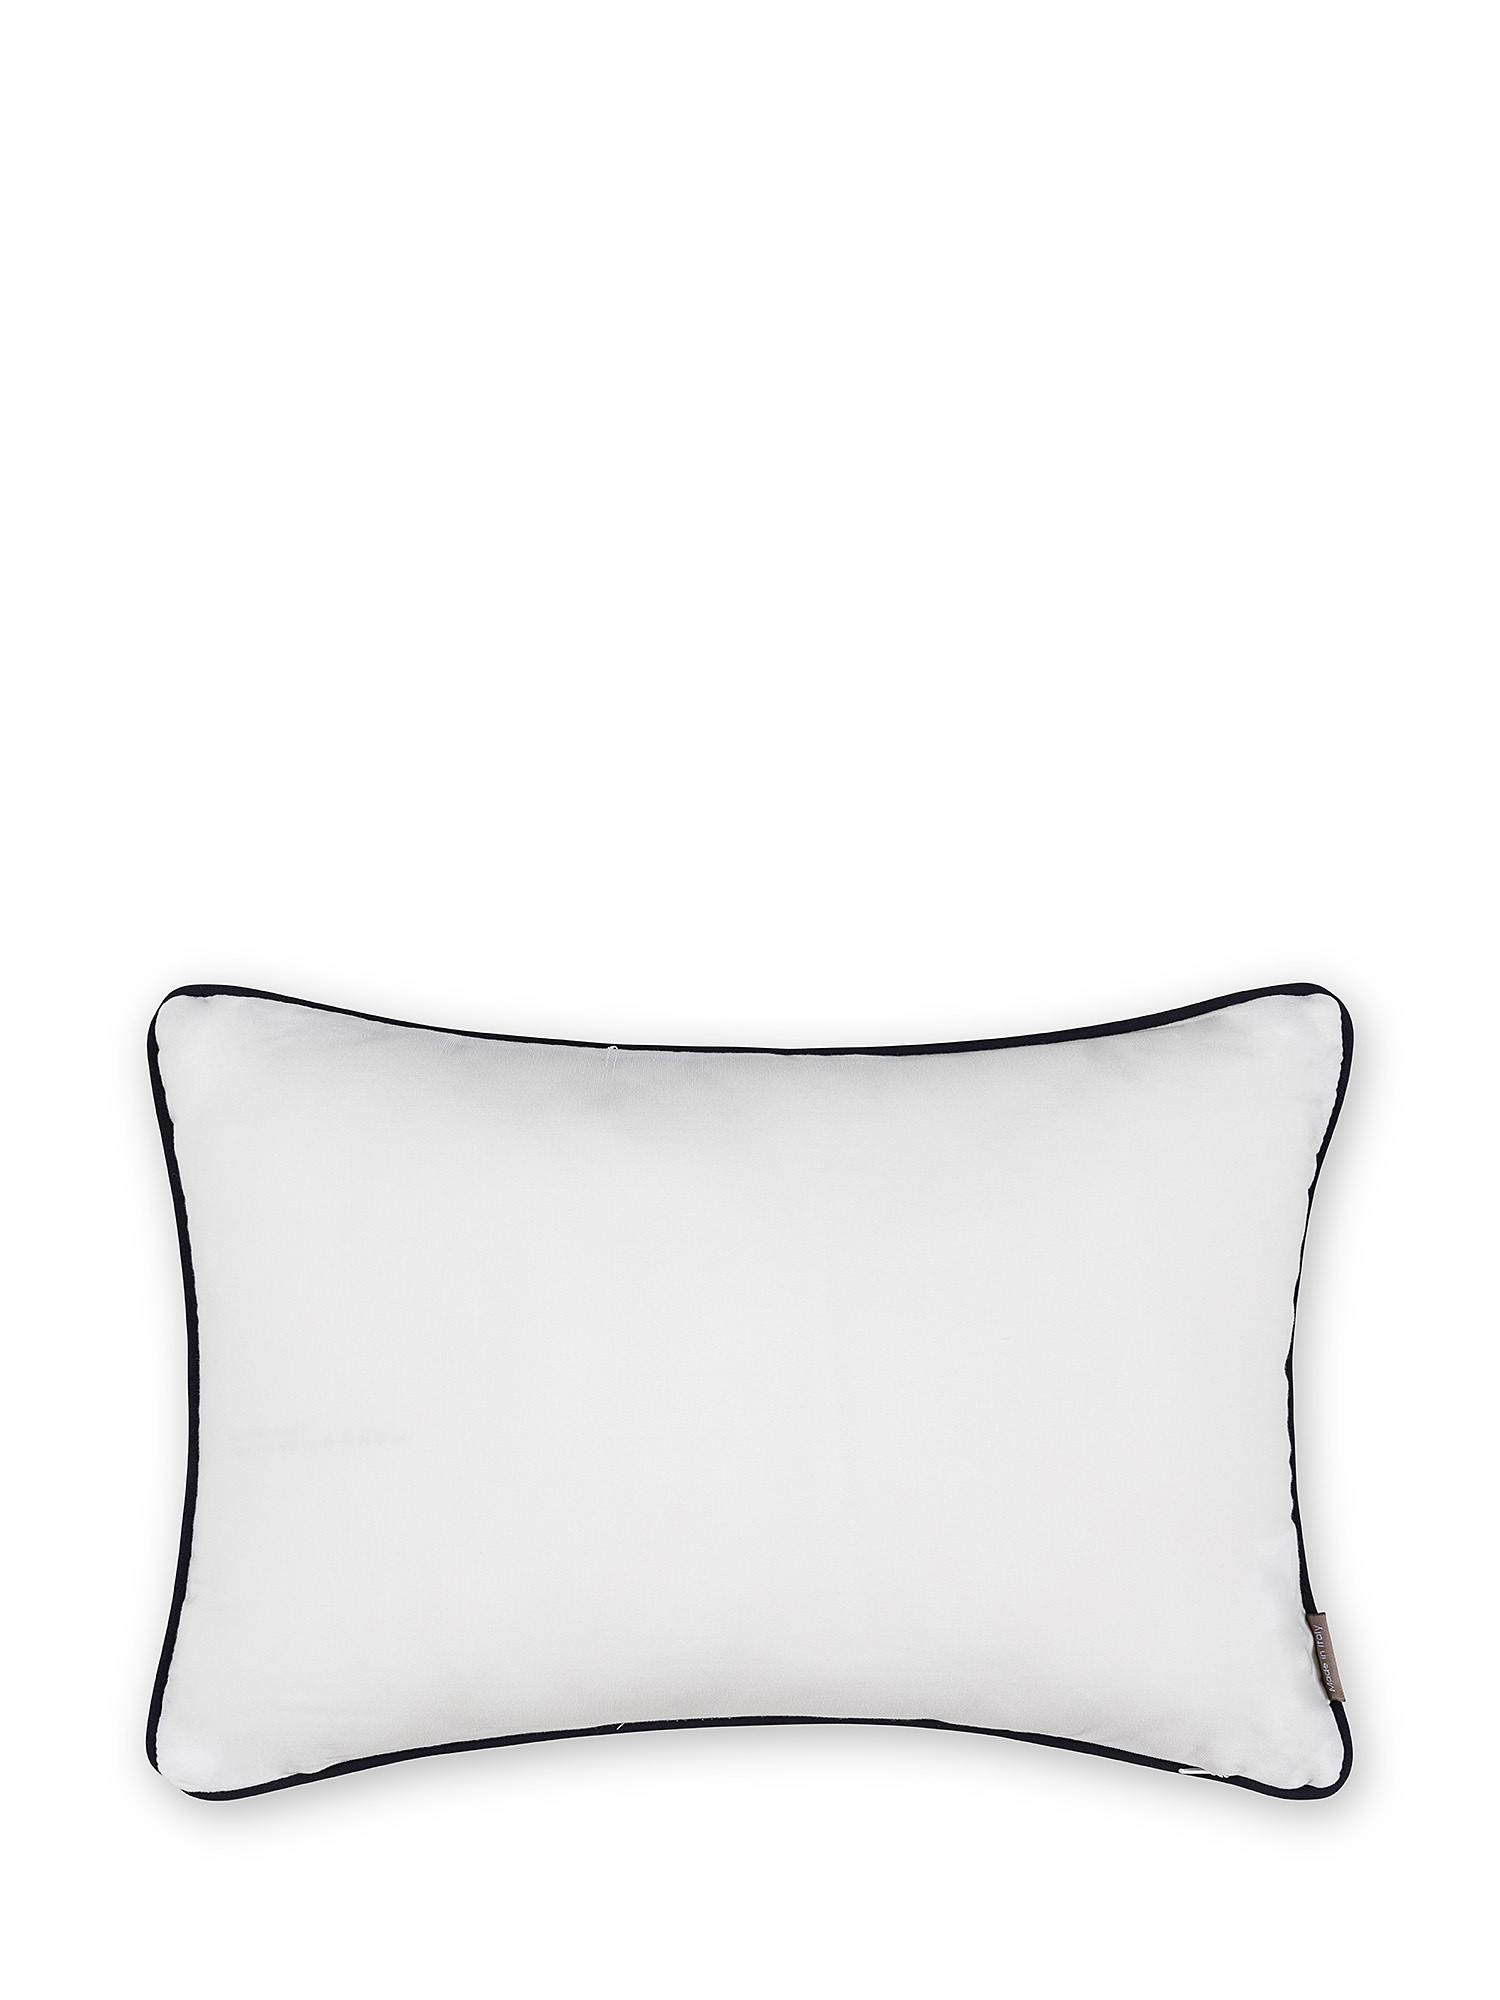 Outdoor cushion in Teflon 30x50cm, White, large image number 1